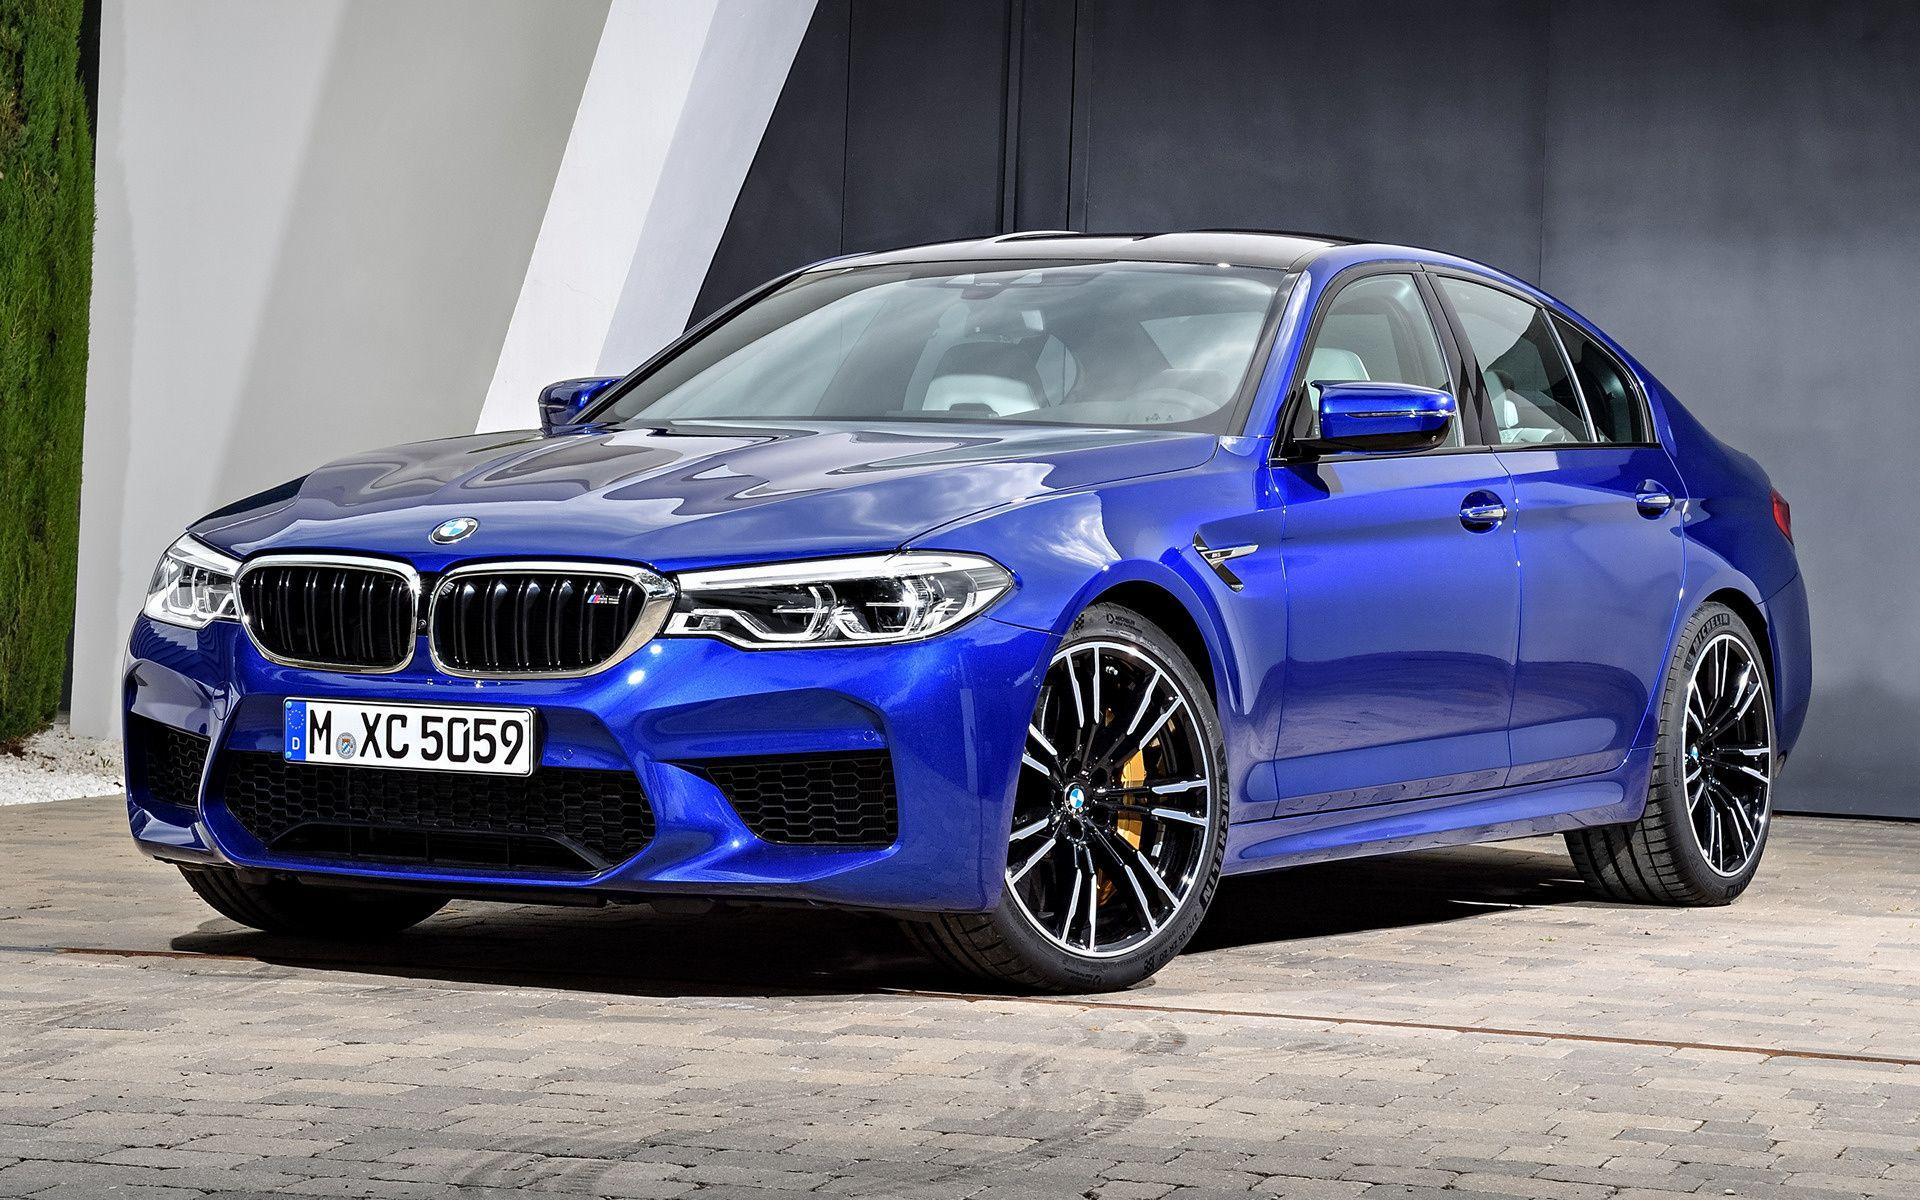 BMW M5 and HD Image